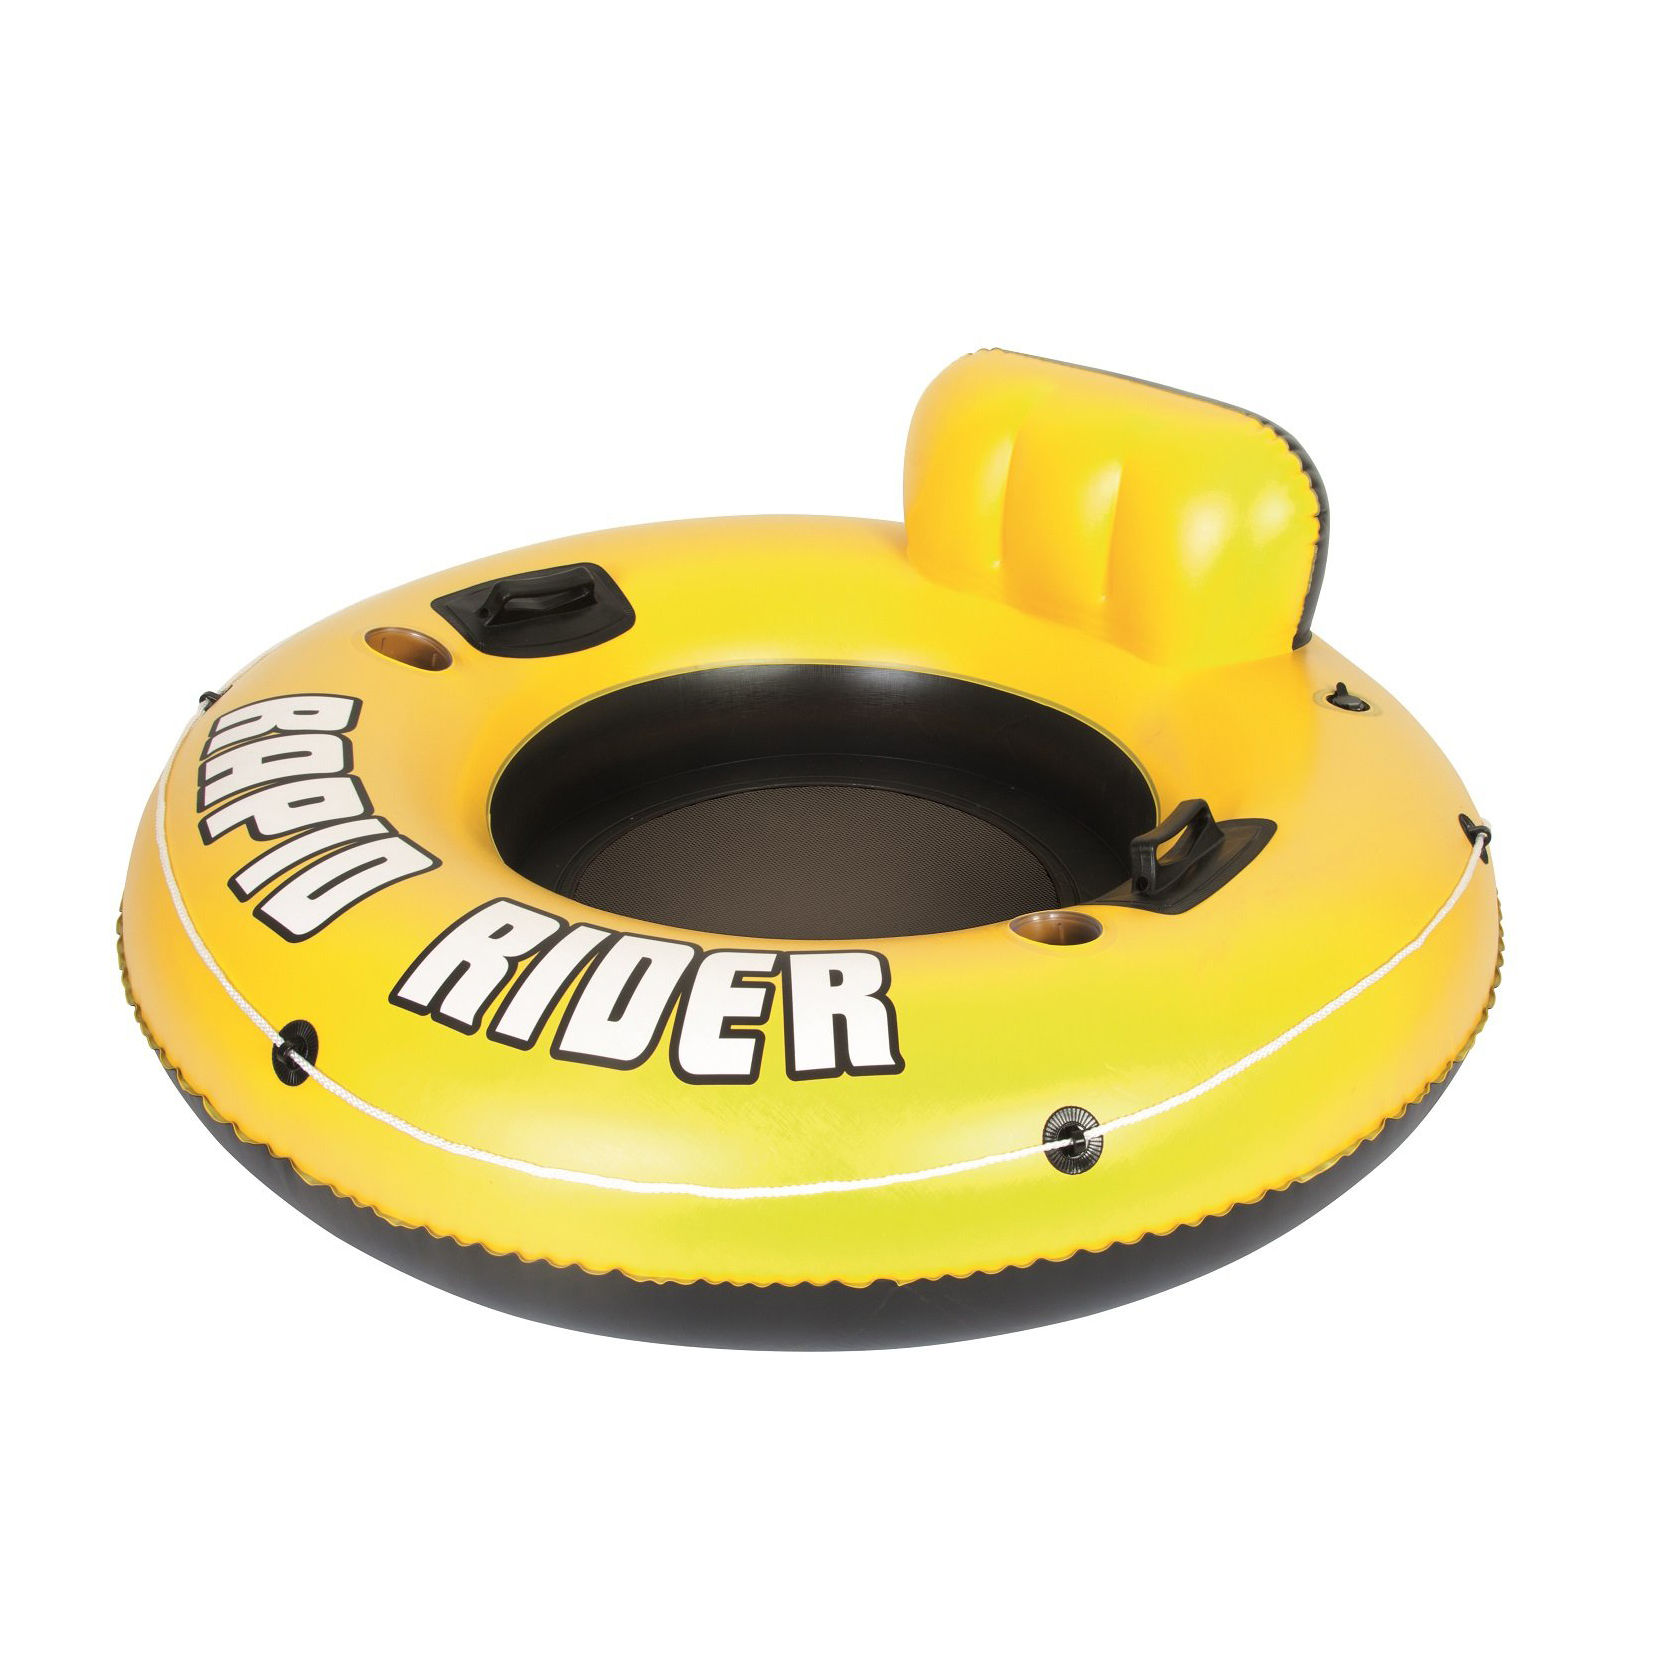 Super Colossal Extra Large Inner Tube for Floating and Sledding or Pool Closing 